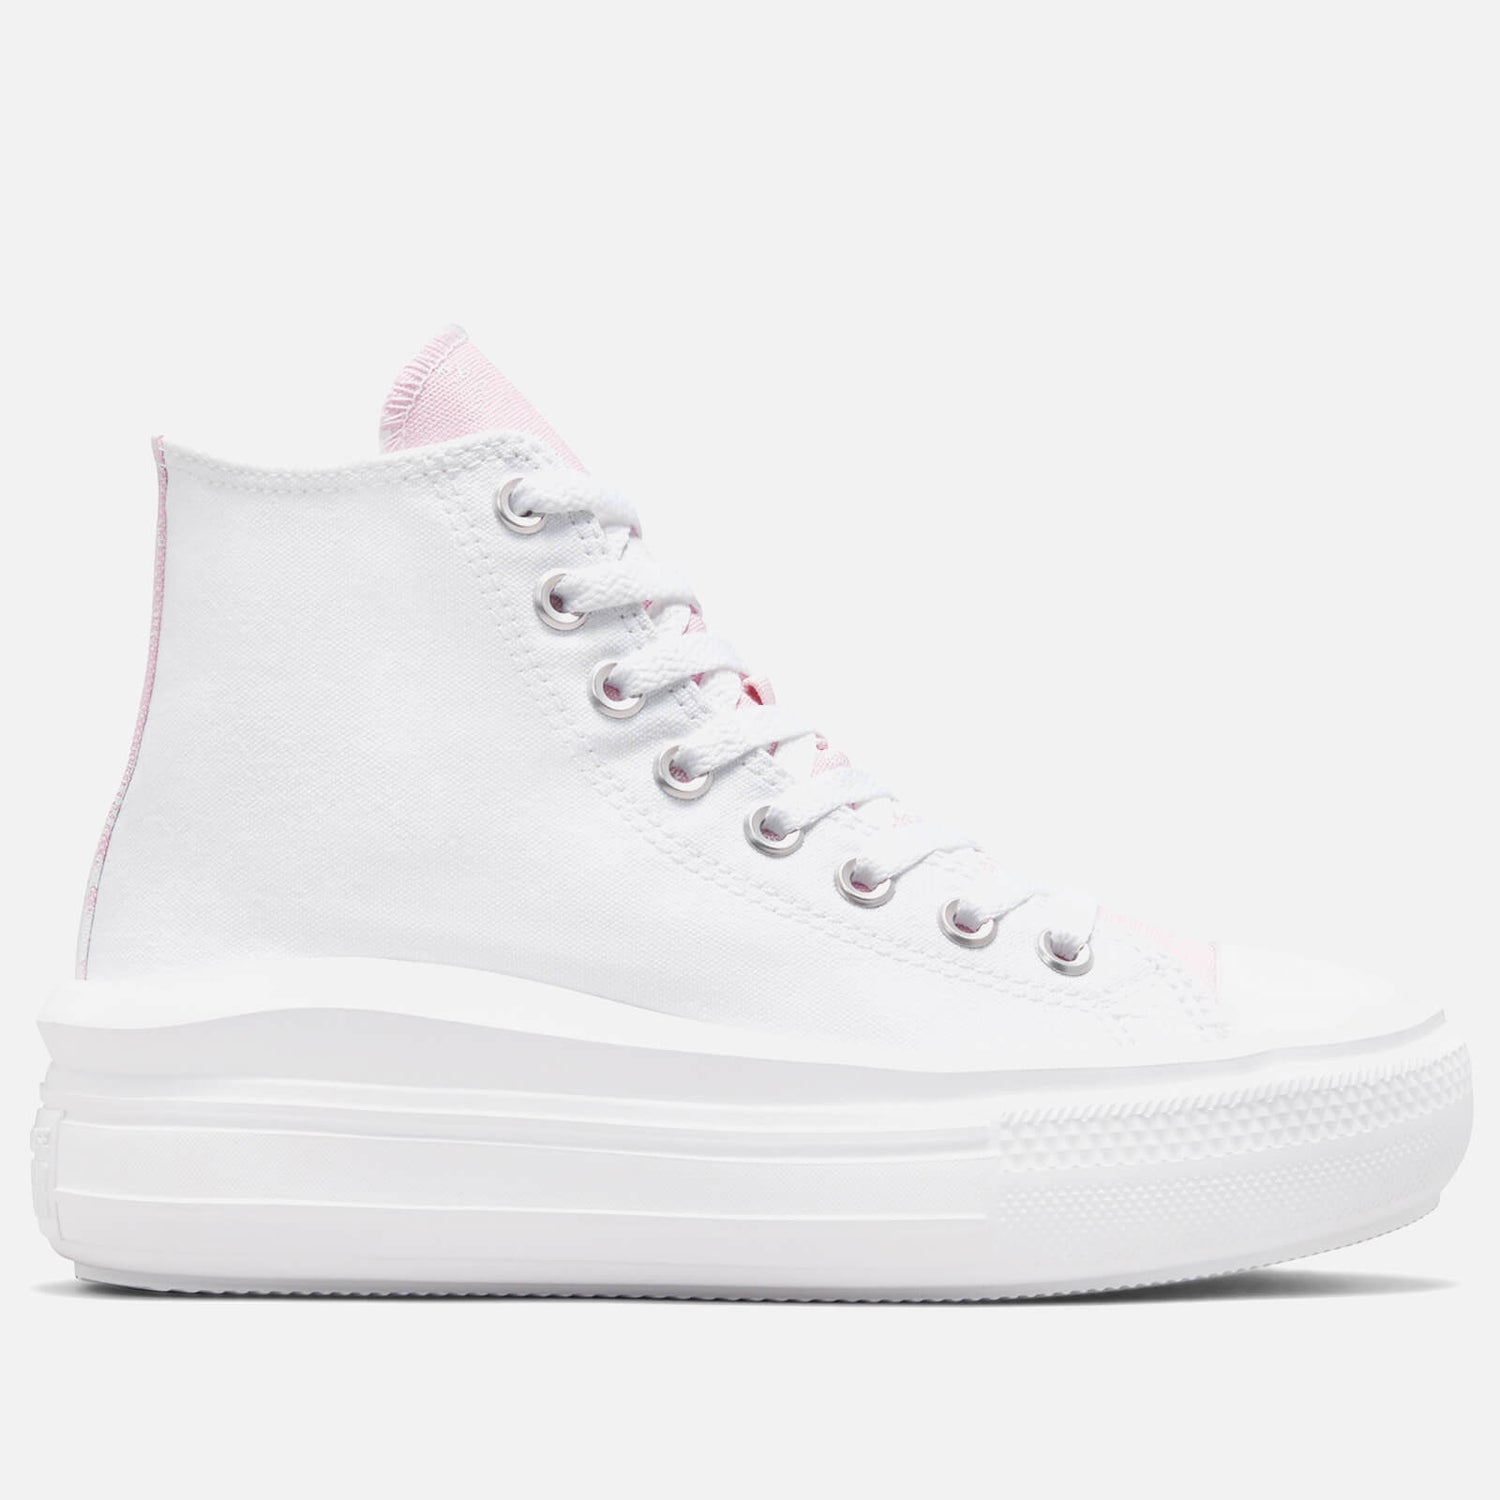 Converse Women's Chuck Taylor All Star Hybrid Floral Move Hi-Top Trainers - White/Pink Foam/White